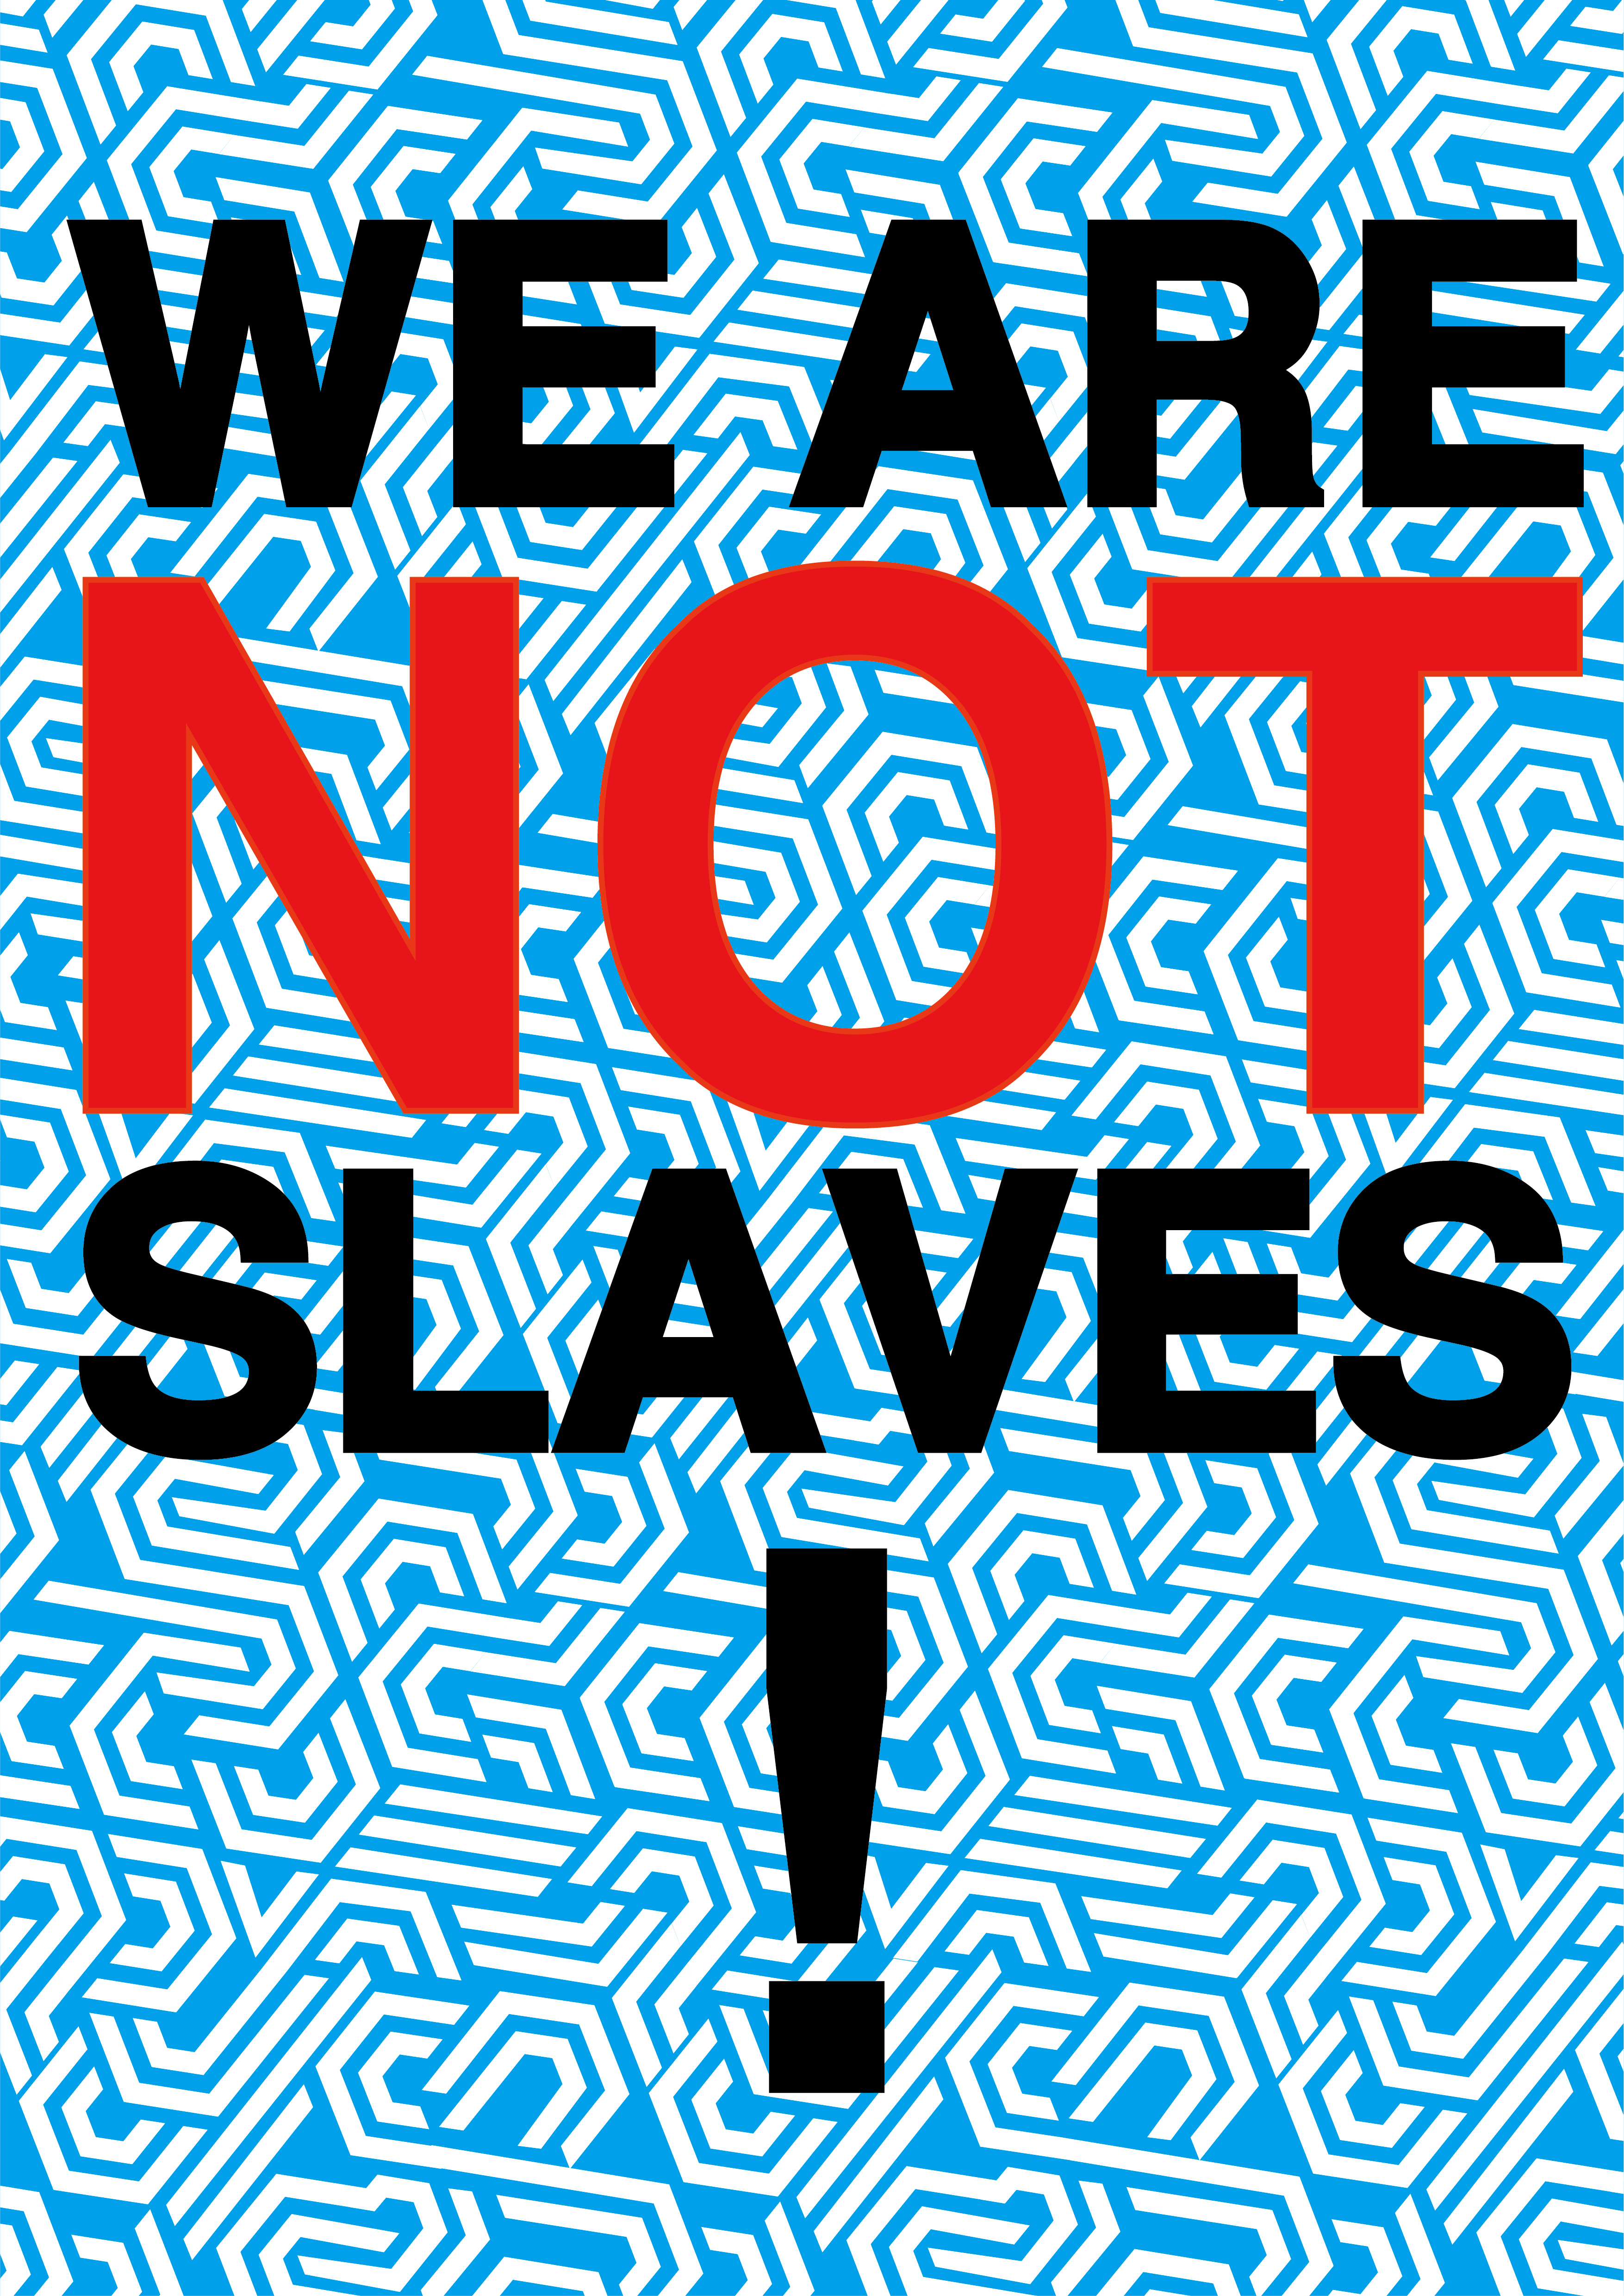 We are not slaves!